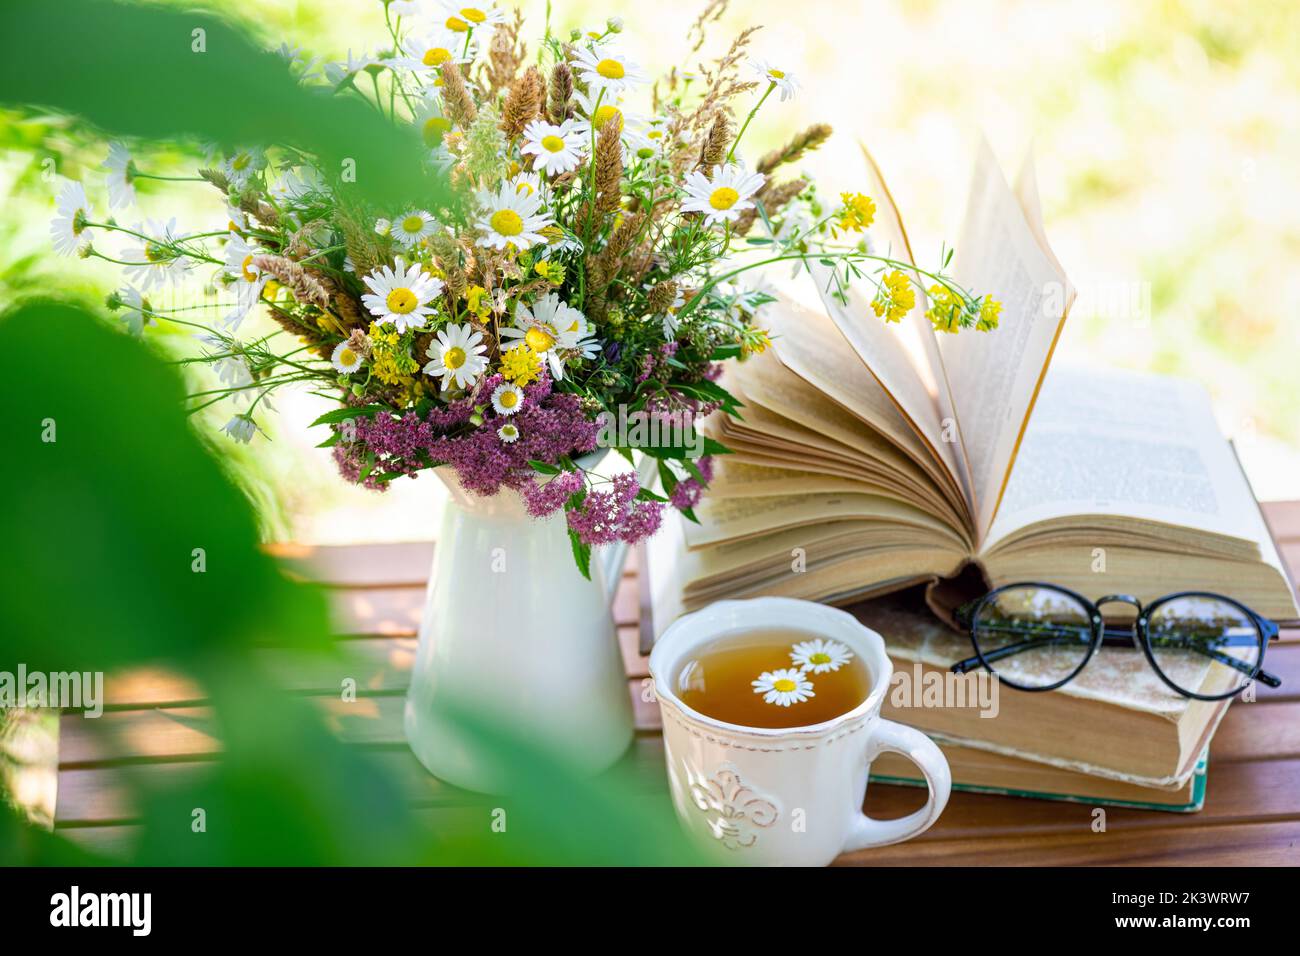 Bouquet of meadow flowers, croissant, cup of tea or coffee, books on table in summer garden. Rest in garden, reading books, breakfast, vacations in na Stock Photo